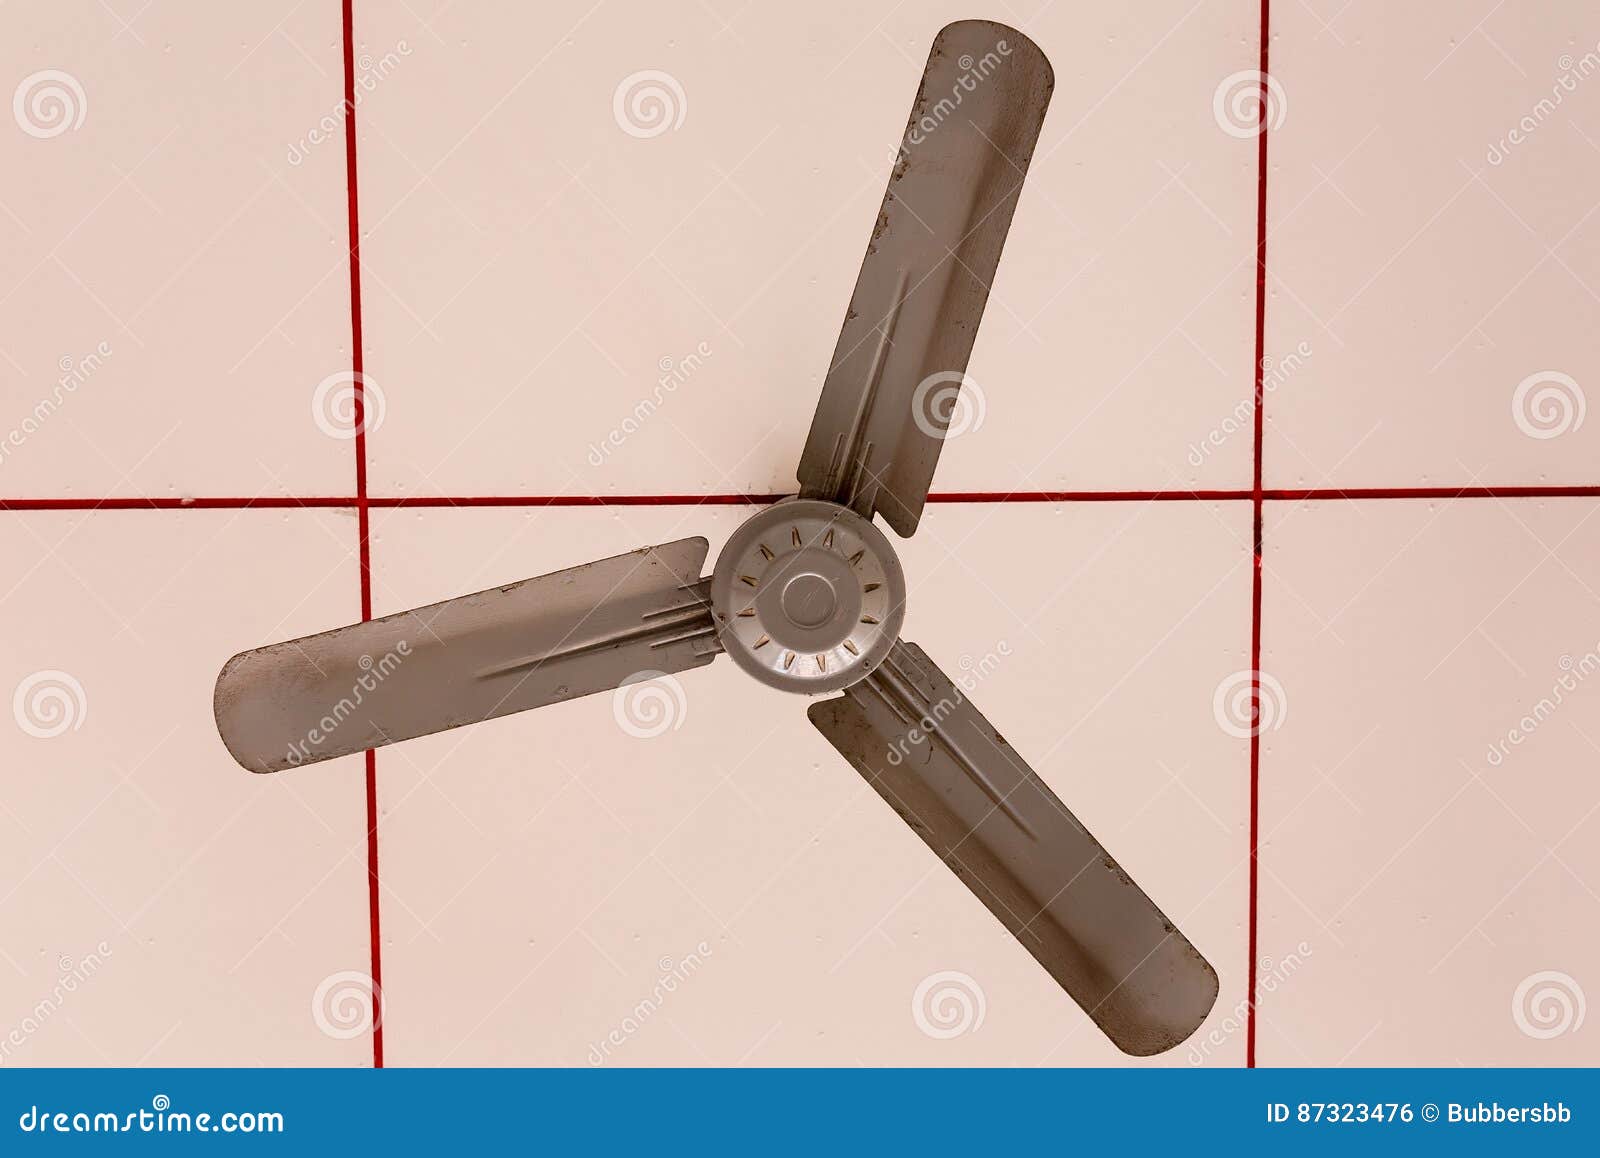 Electric Ceiling Fan Over A Canopy On An Event Stock Photo